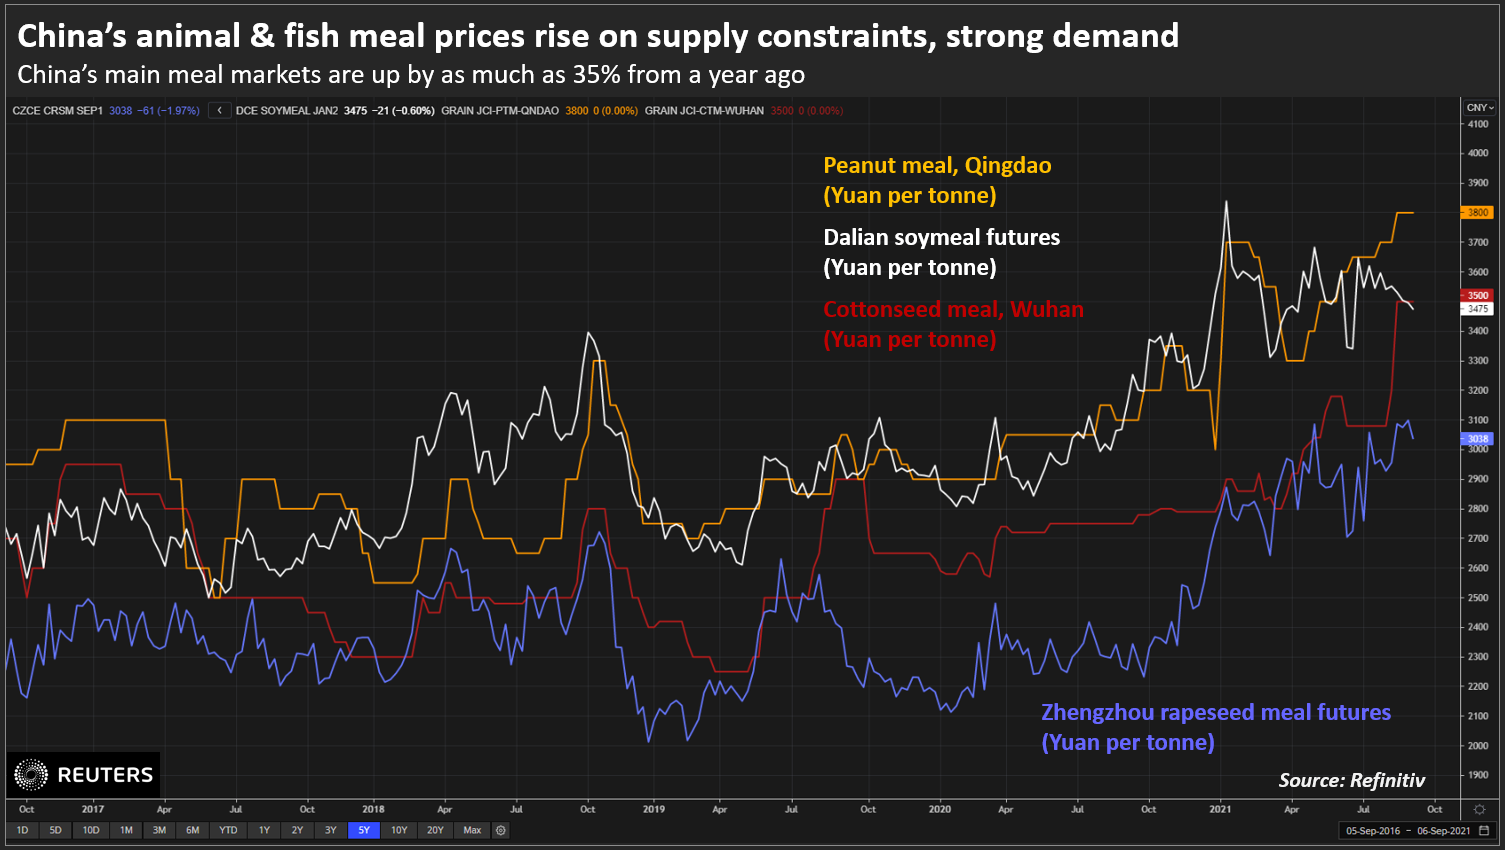 China's animal meal and fish meal prices rise due to supply constraints and high demand